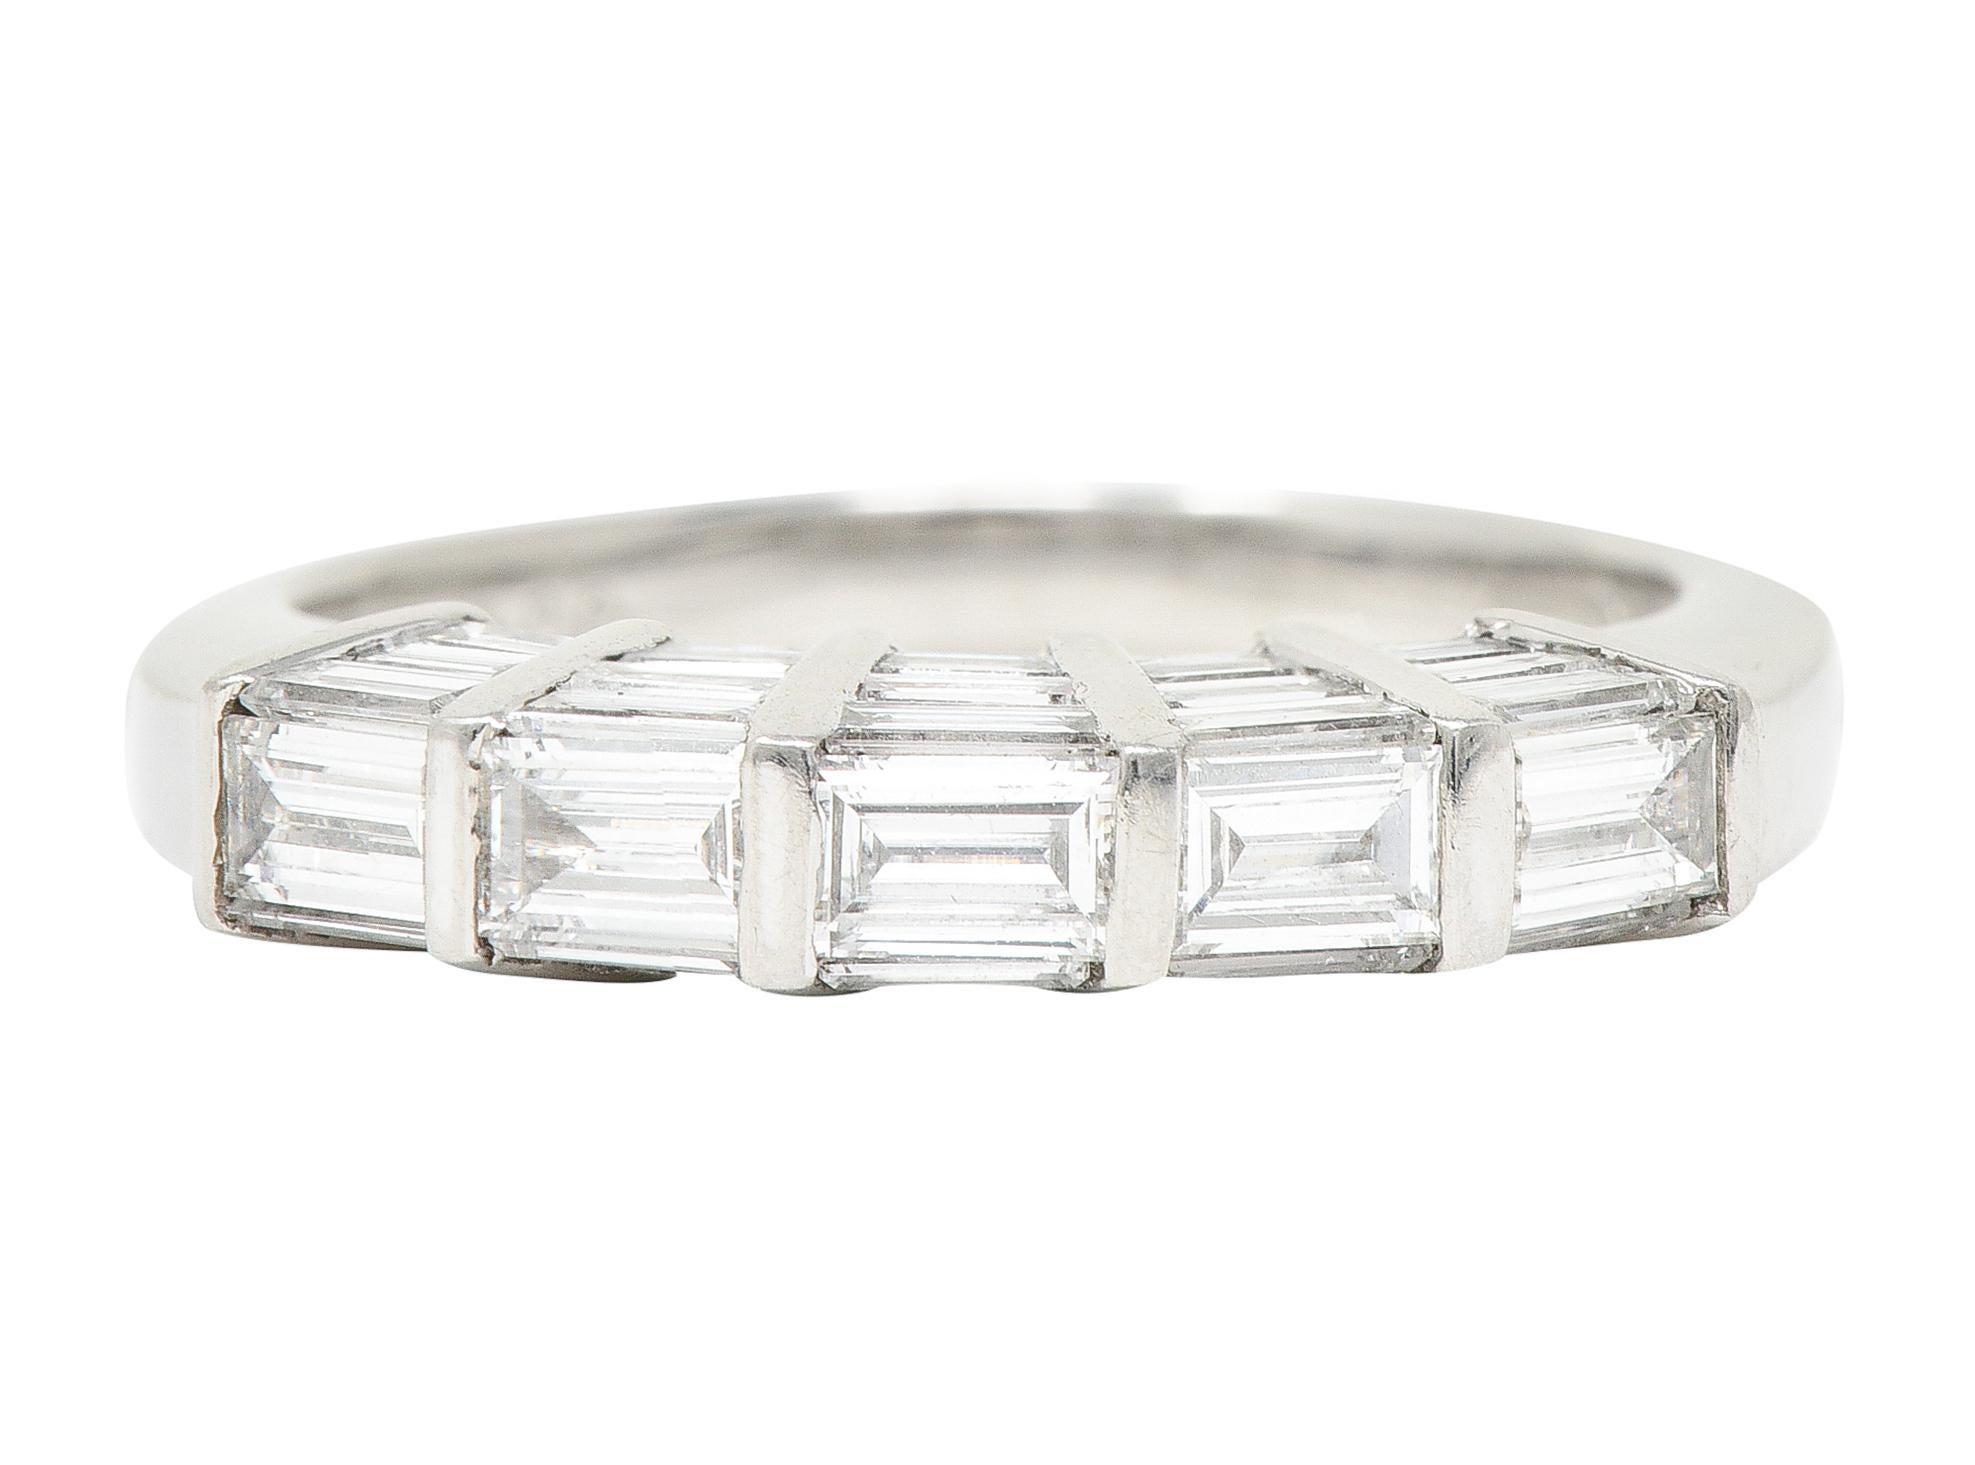 Ring features baguette cut diamonds bar set across top and profile - graduating in size. Weighing approximately 2.00 carats total - F/G in color with VS clarity. Inscribed with carat weight. Completed by high polished finish. Stamped for platinum.